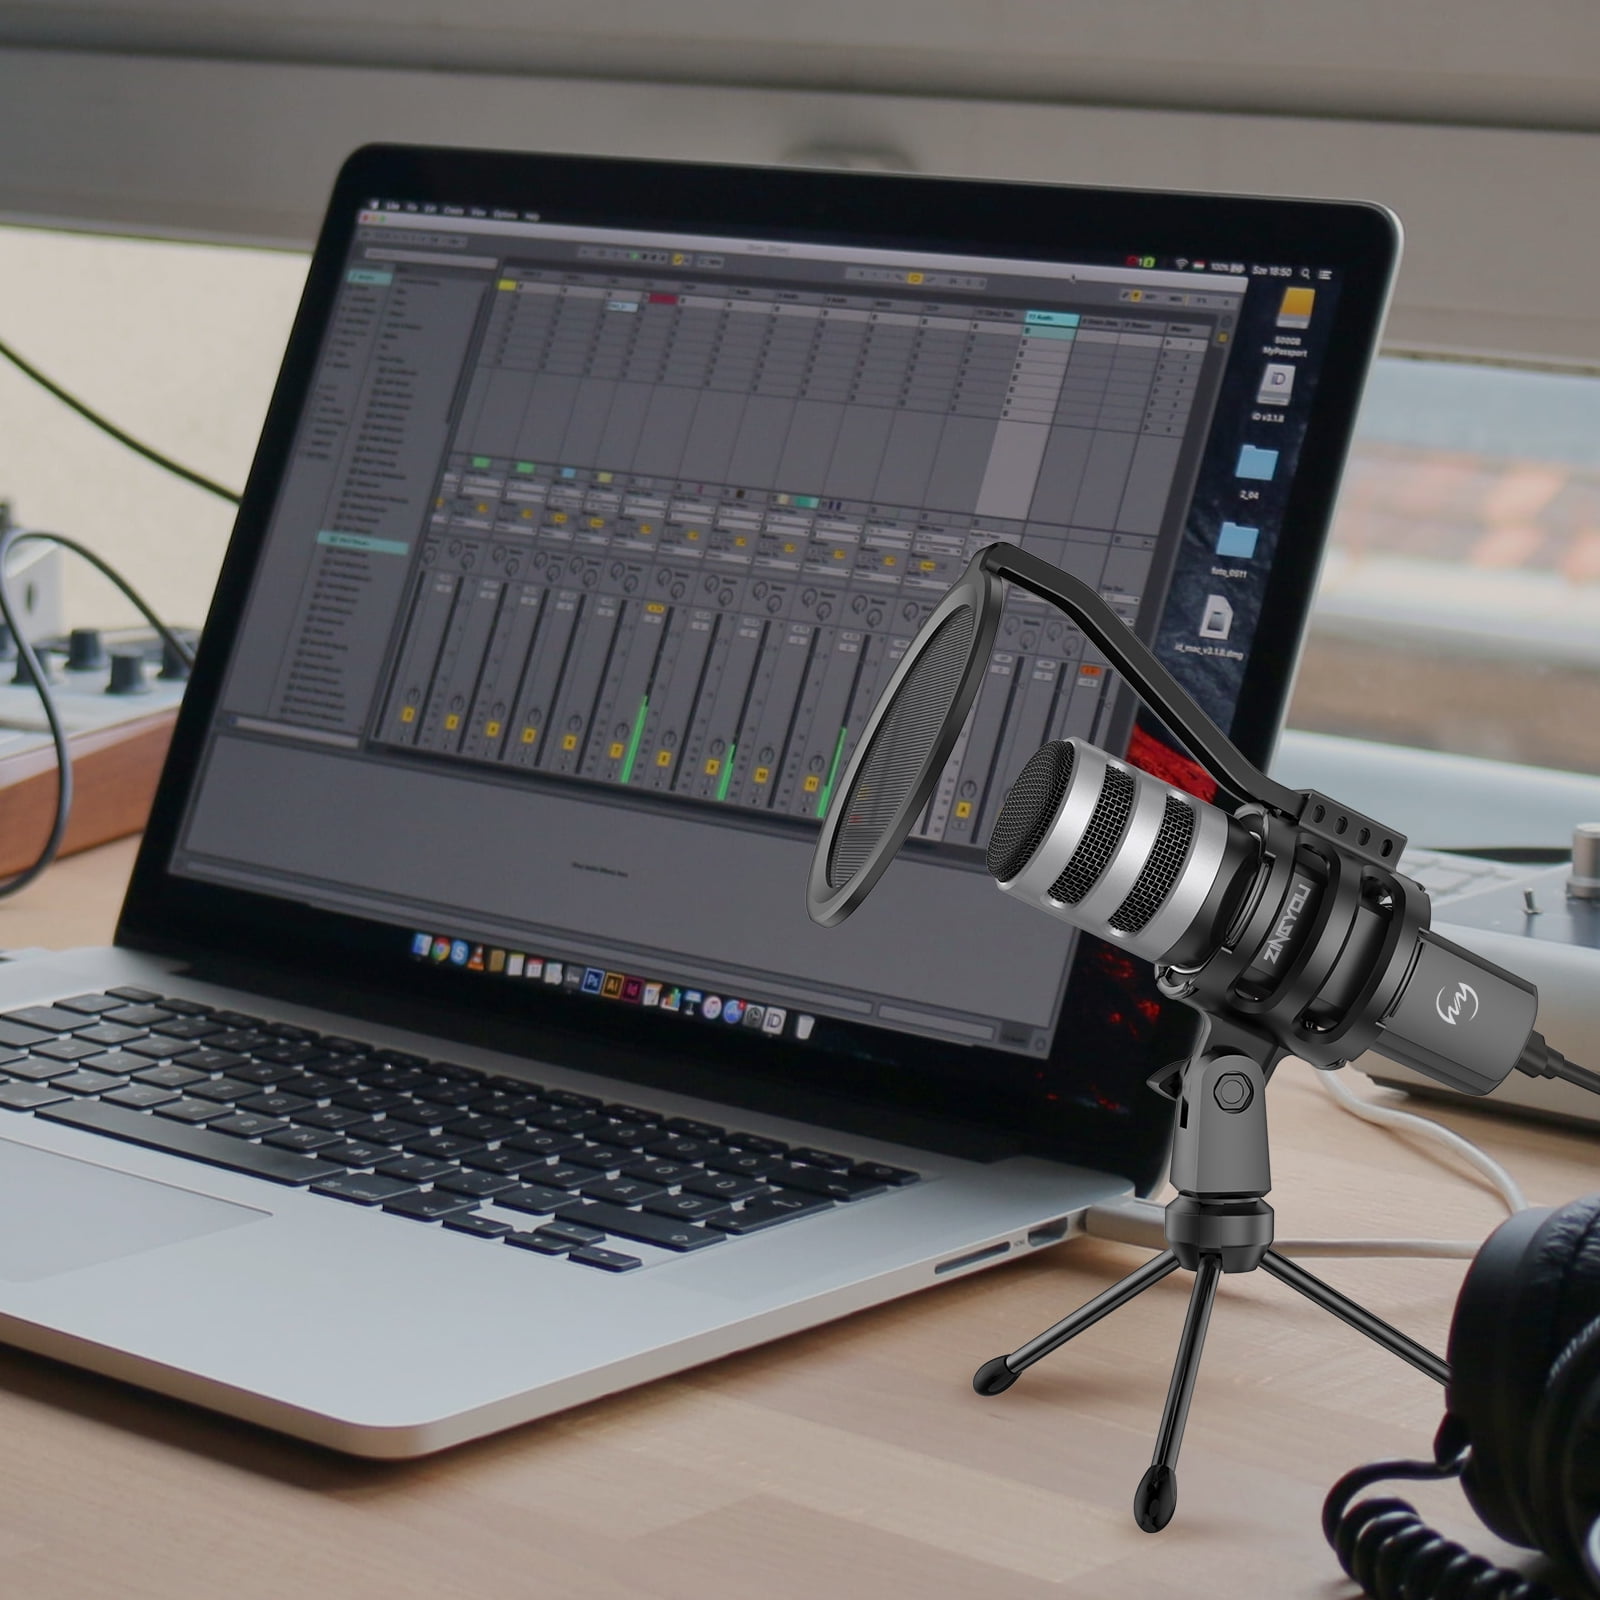 ZY-UD1 Silver ZINGYOU USB Microphone Bundle Desktop Computer Mic for Gaming Podcasting Recording Vocals Singing Compatible with Windows macOS Laptop Computer 